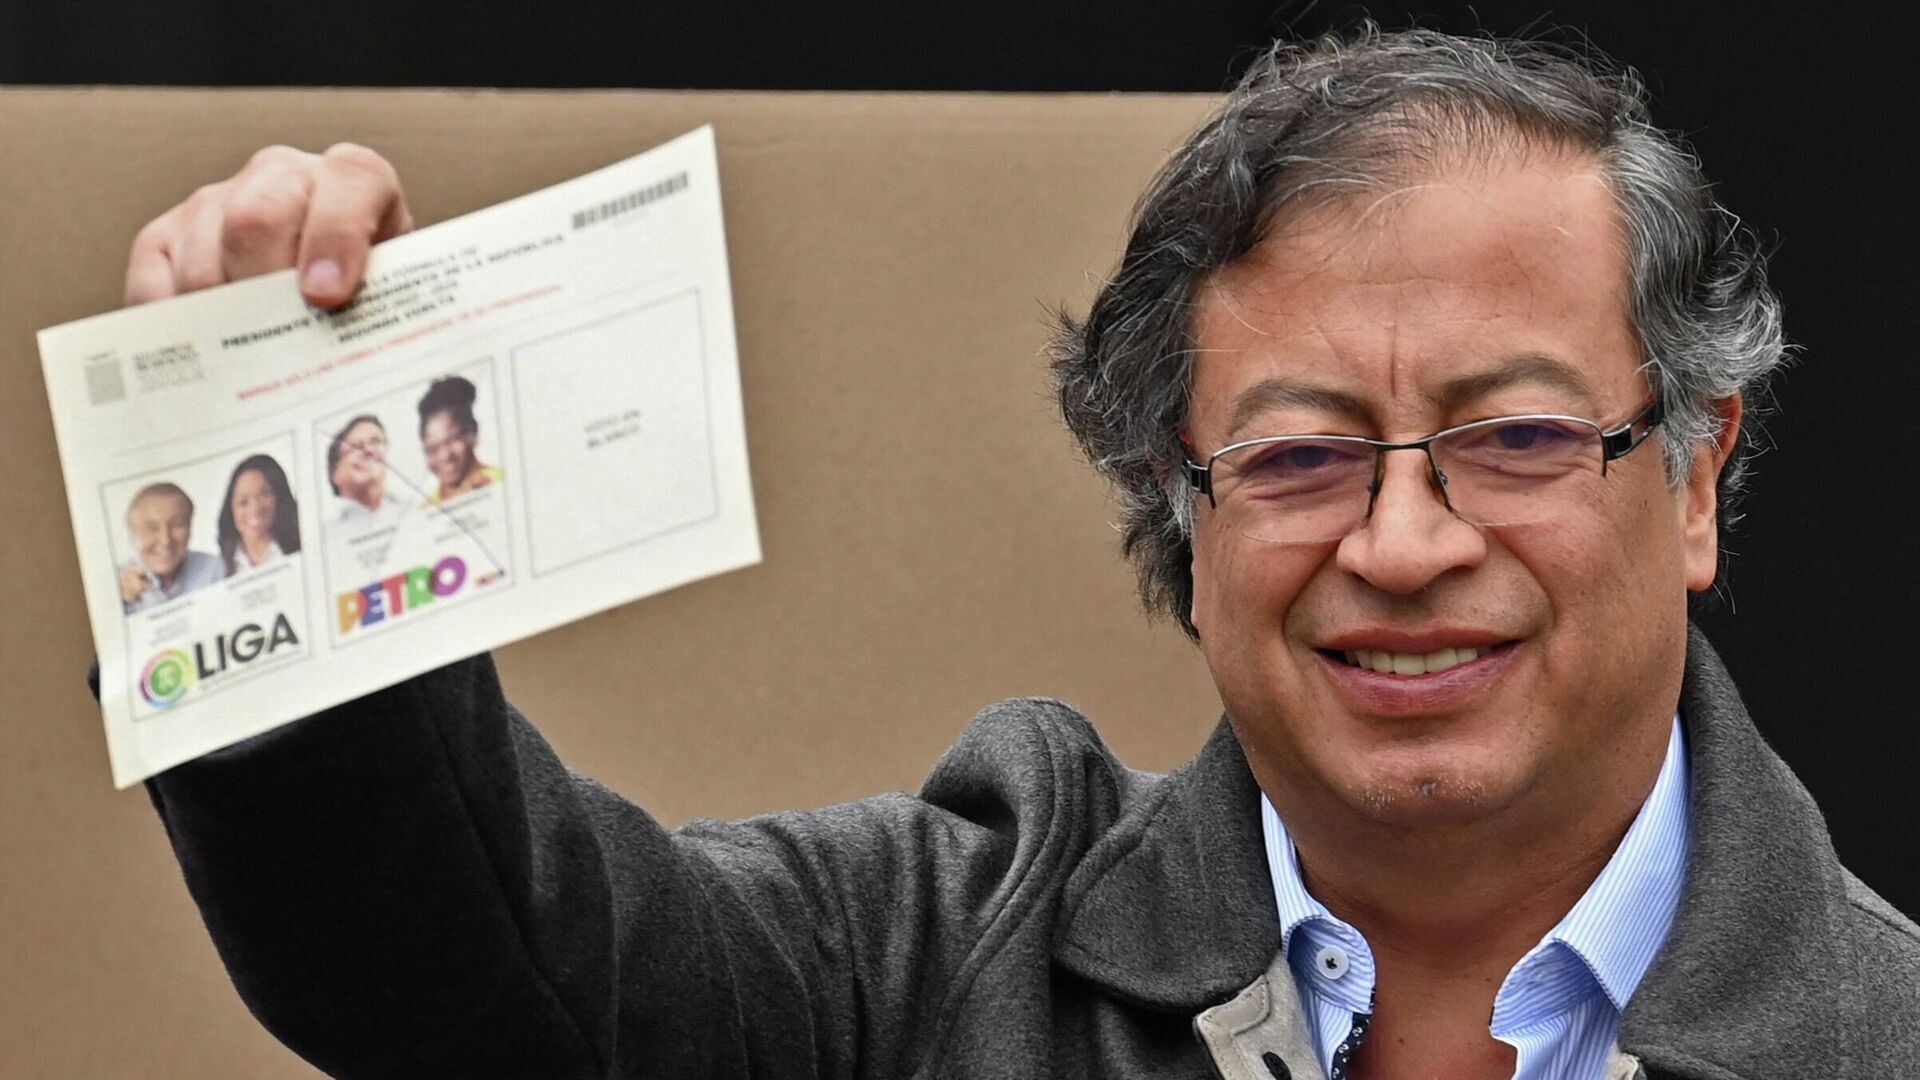 Colombian left-wing presidential candidate Gustavo Petro shows his ballot as he votes during the presidential runoff election in Bogota, on June 19, 2022 - Sputnik International, 1920, 19.06.2022